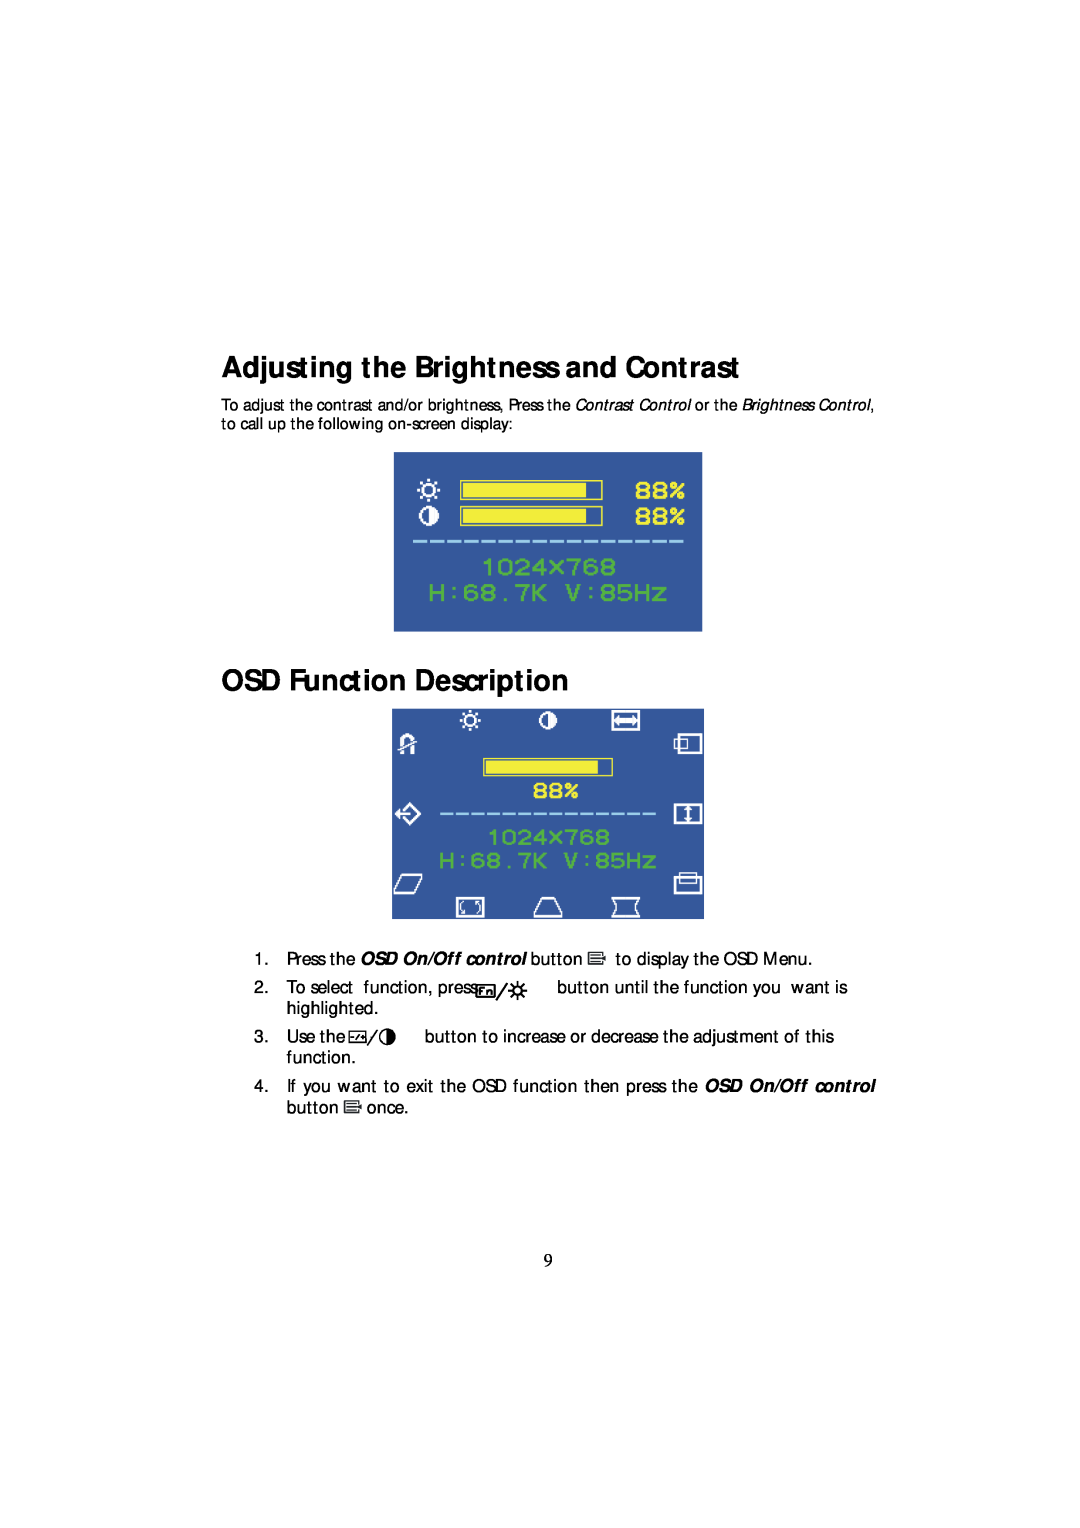 Acer CRT Monitor manual Adjusting the Brightness and Contrast, OSD Function Description 